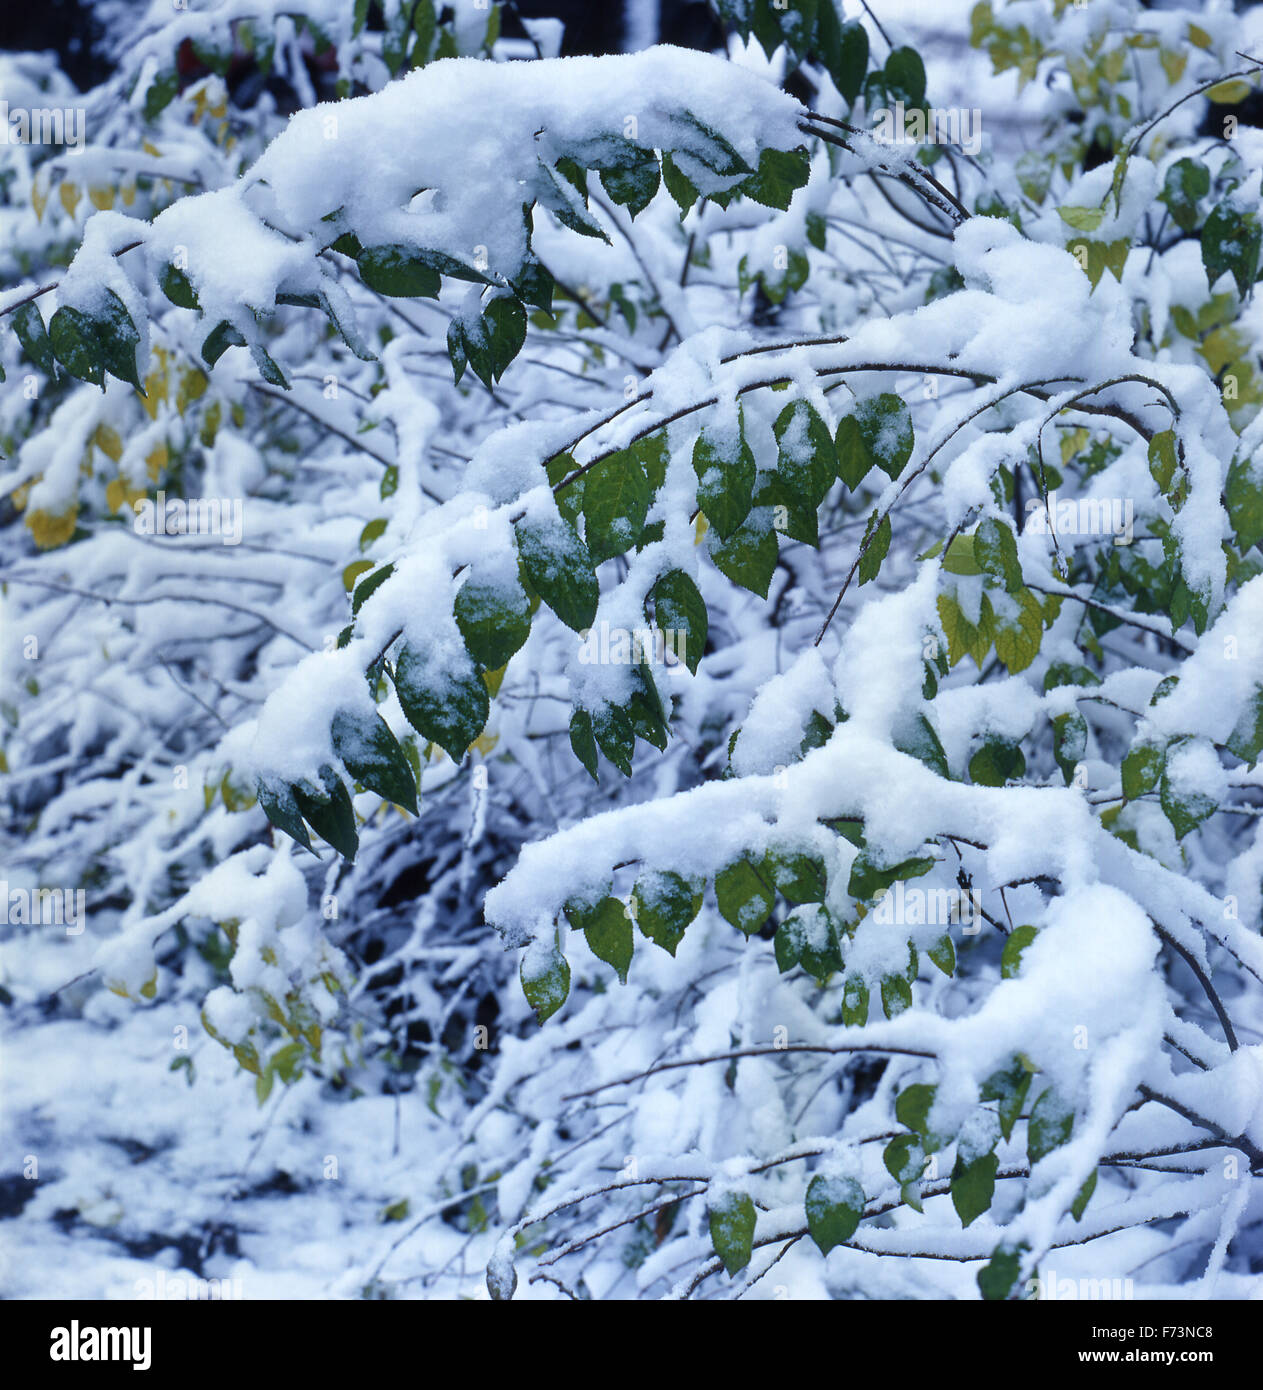 The branches of a bush of a spirea (Spiraea) covered with snow. square format. Stock Photo